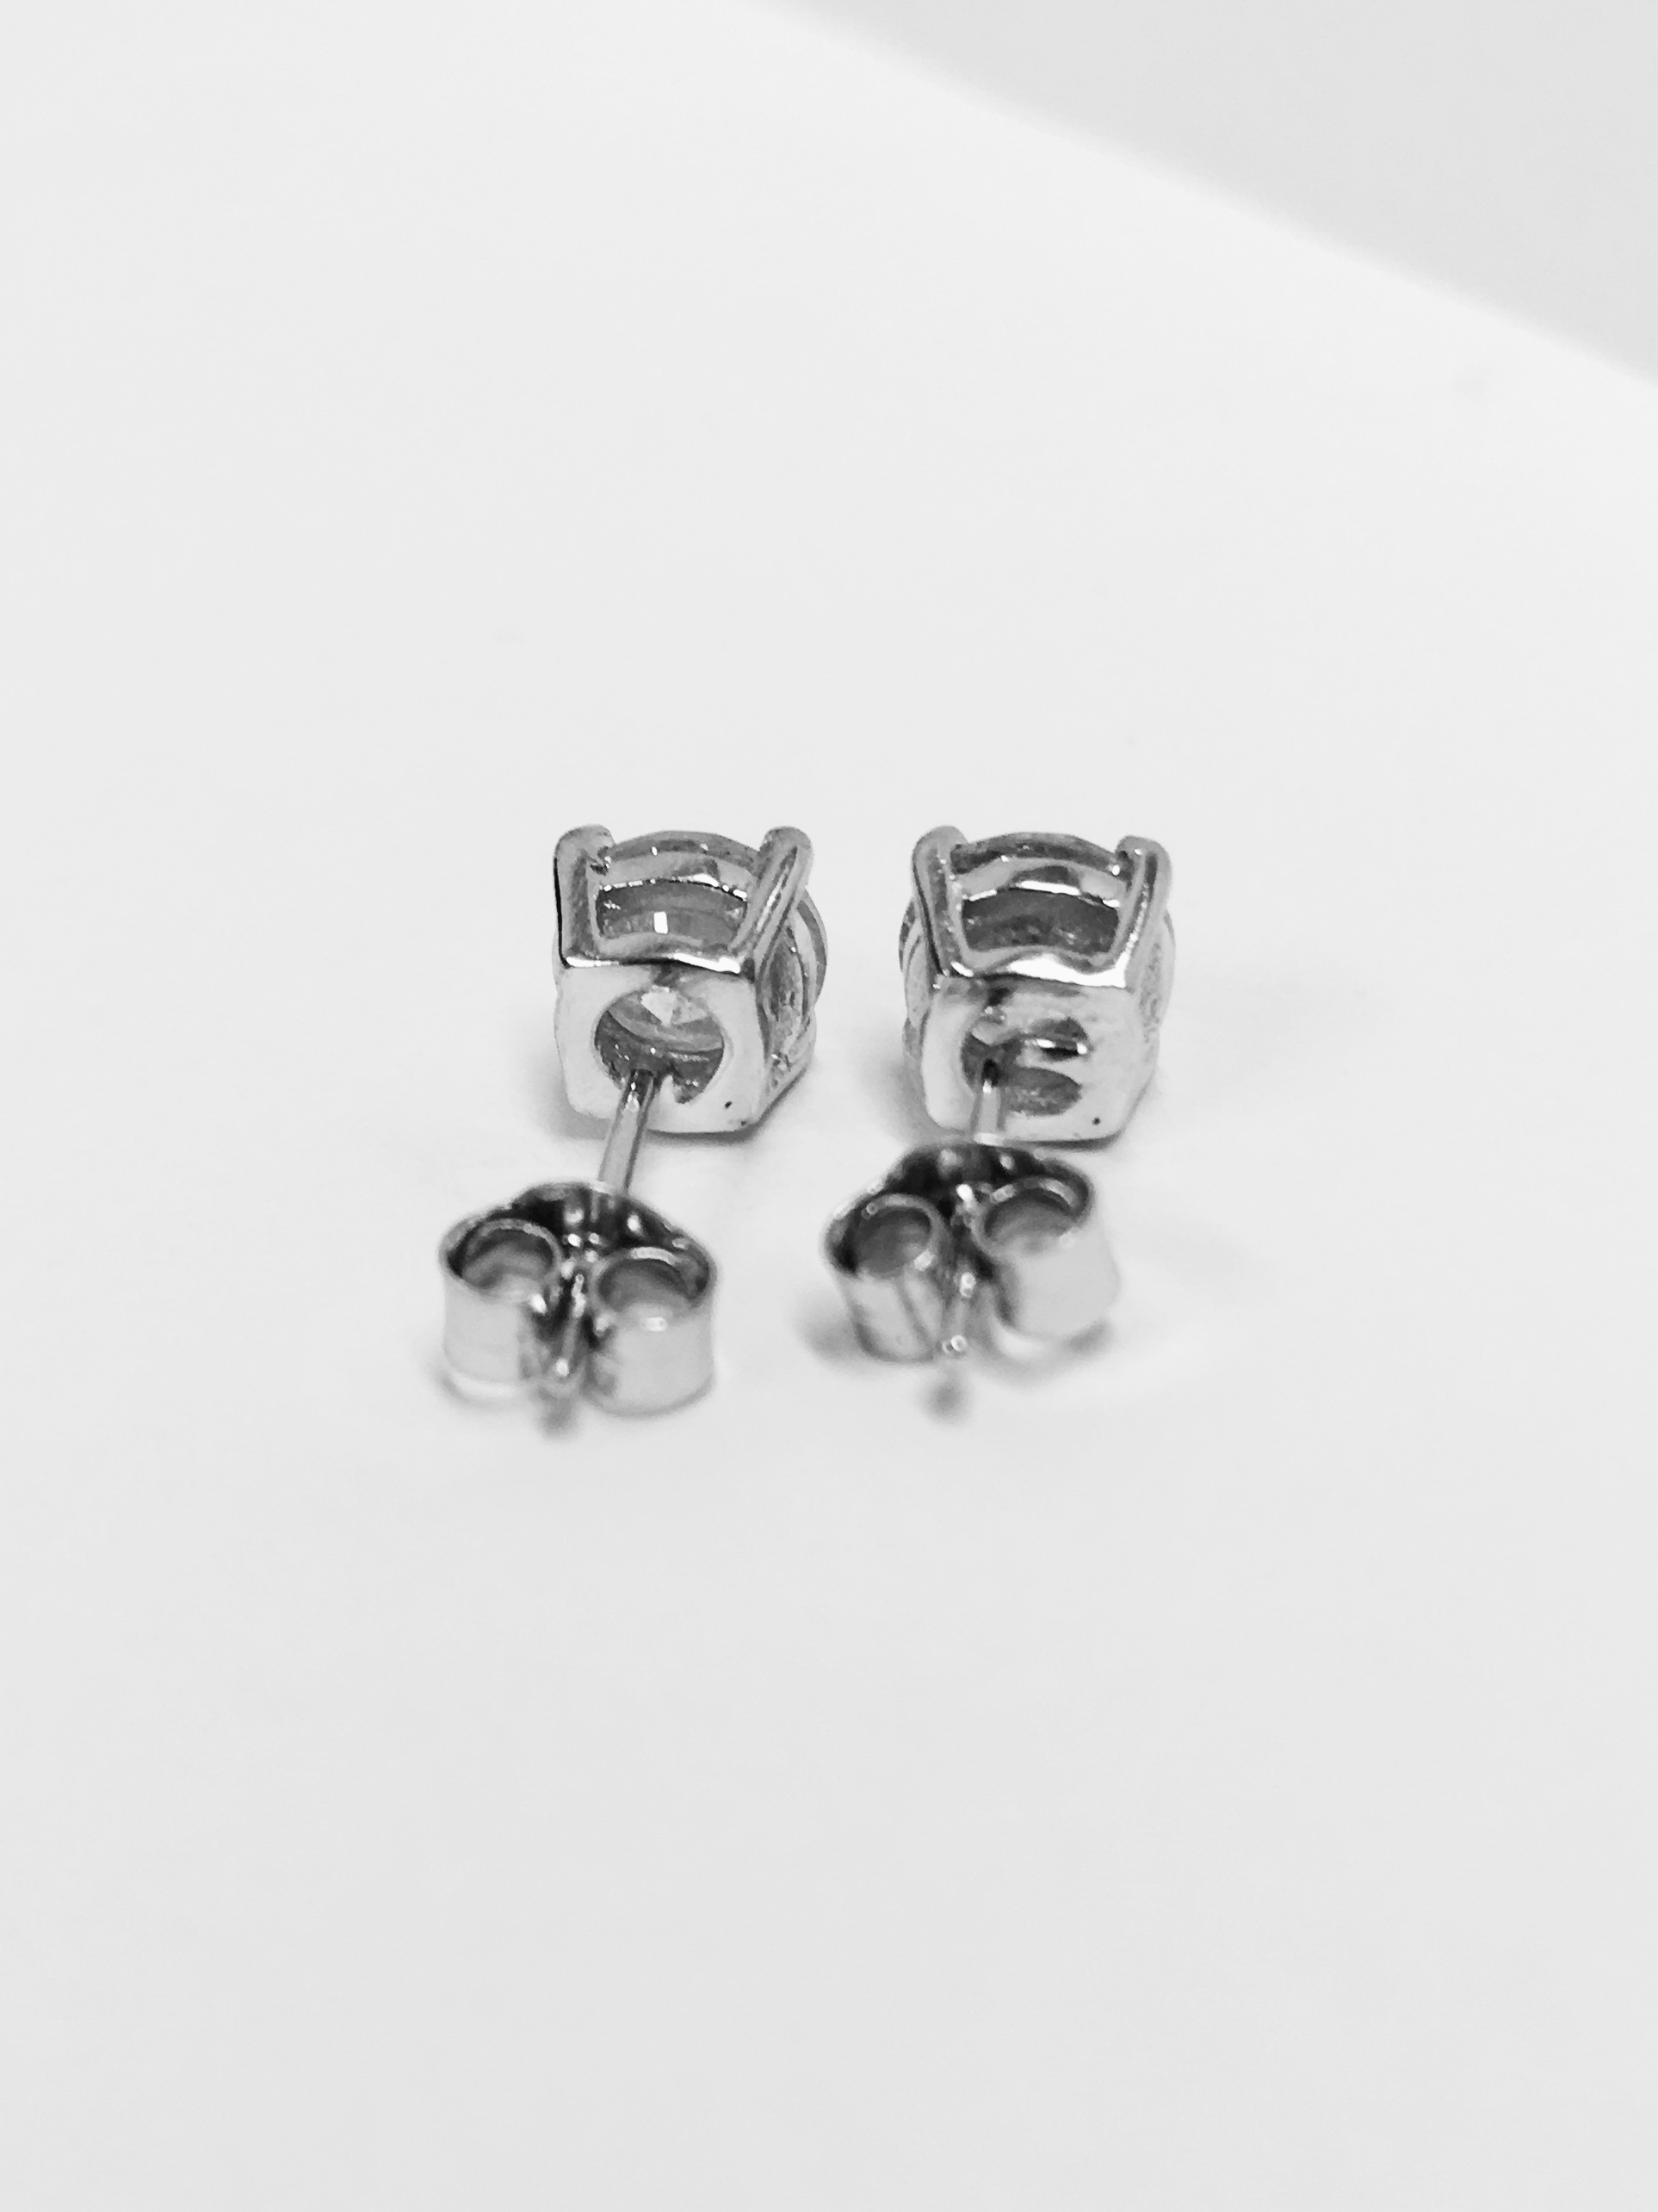 1ct diamond solitaire earrings - Image 23 of 24